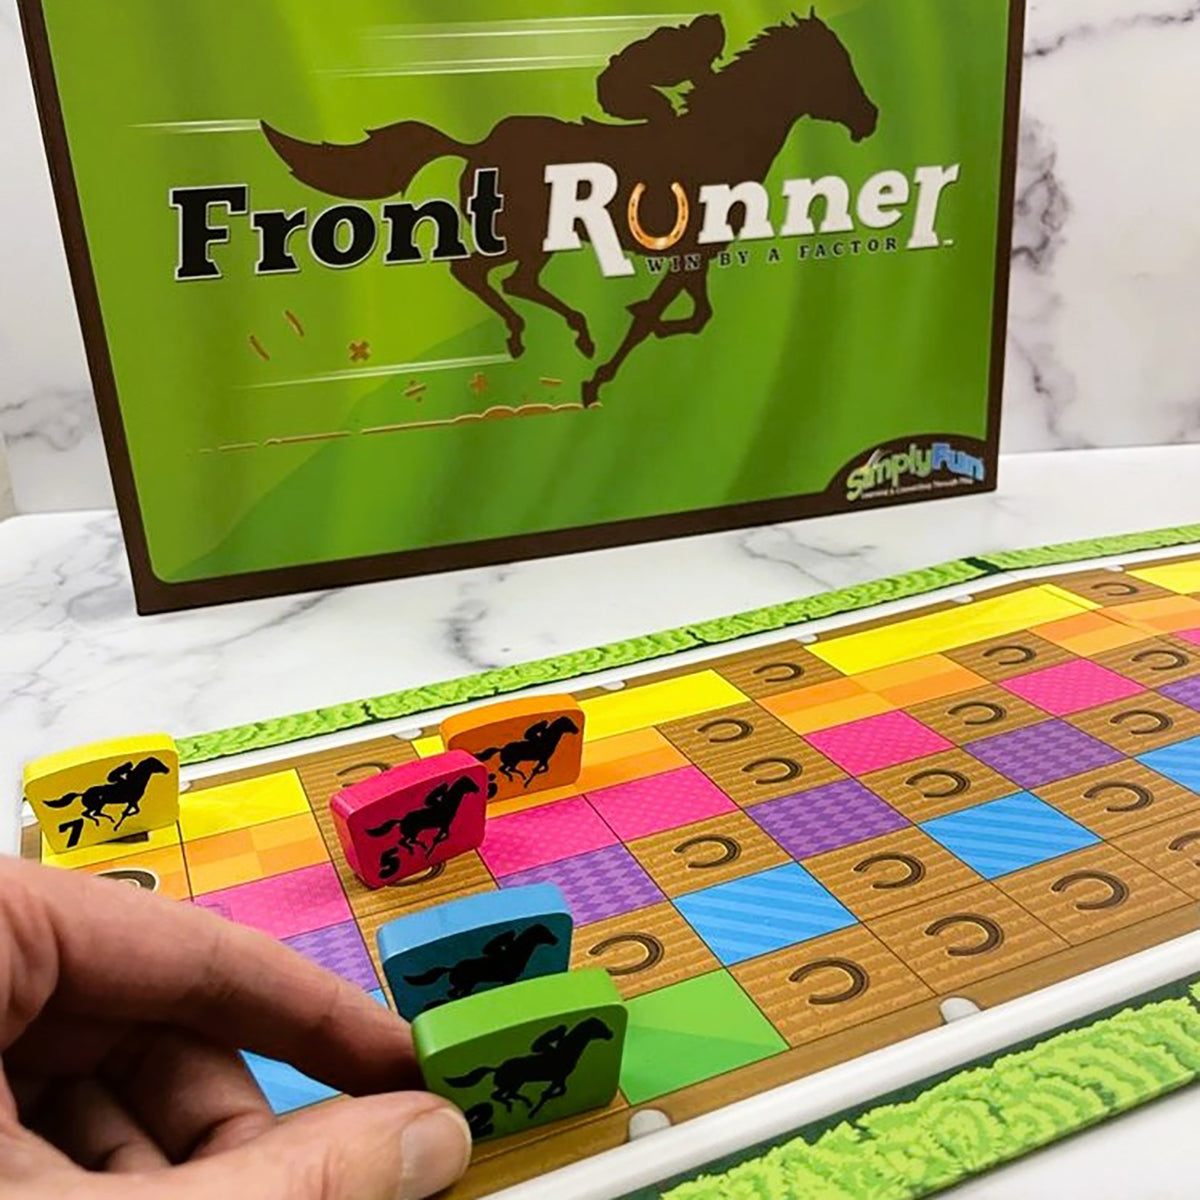 Front Runner by SimplyFun is a math game focusing on algebra and factors for ages 8 and up.